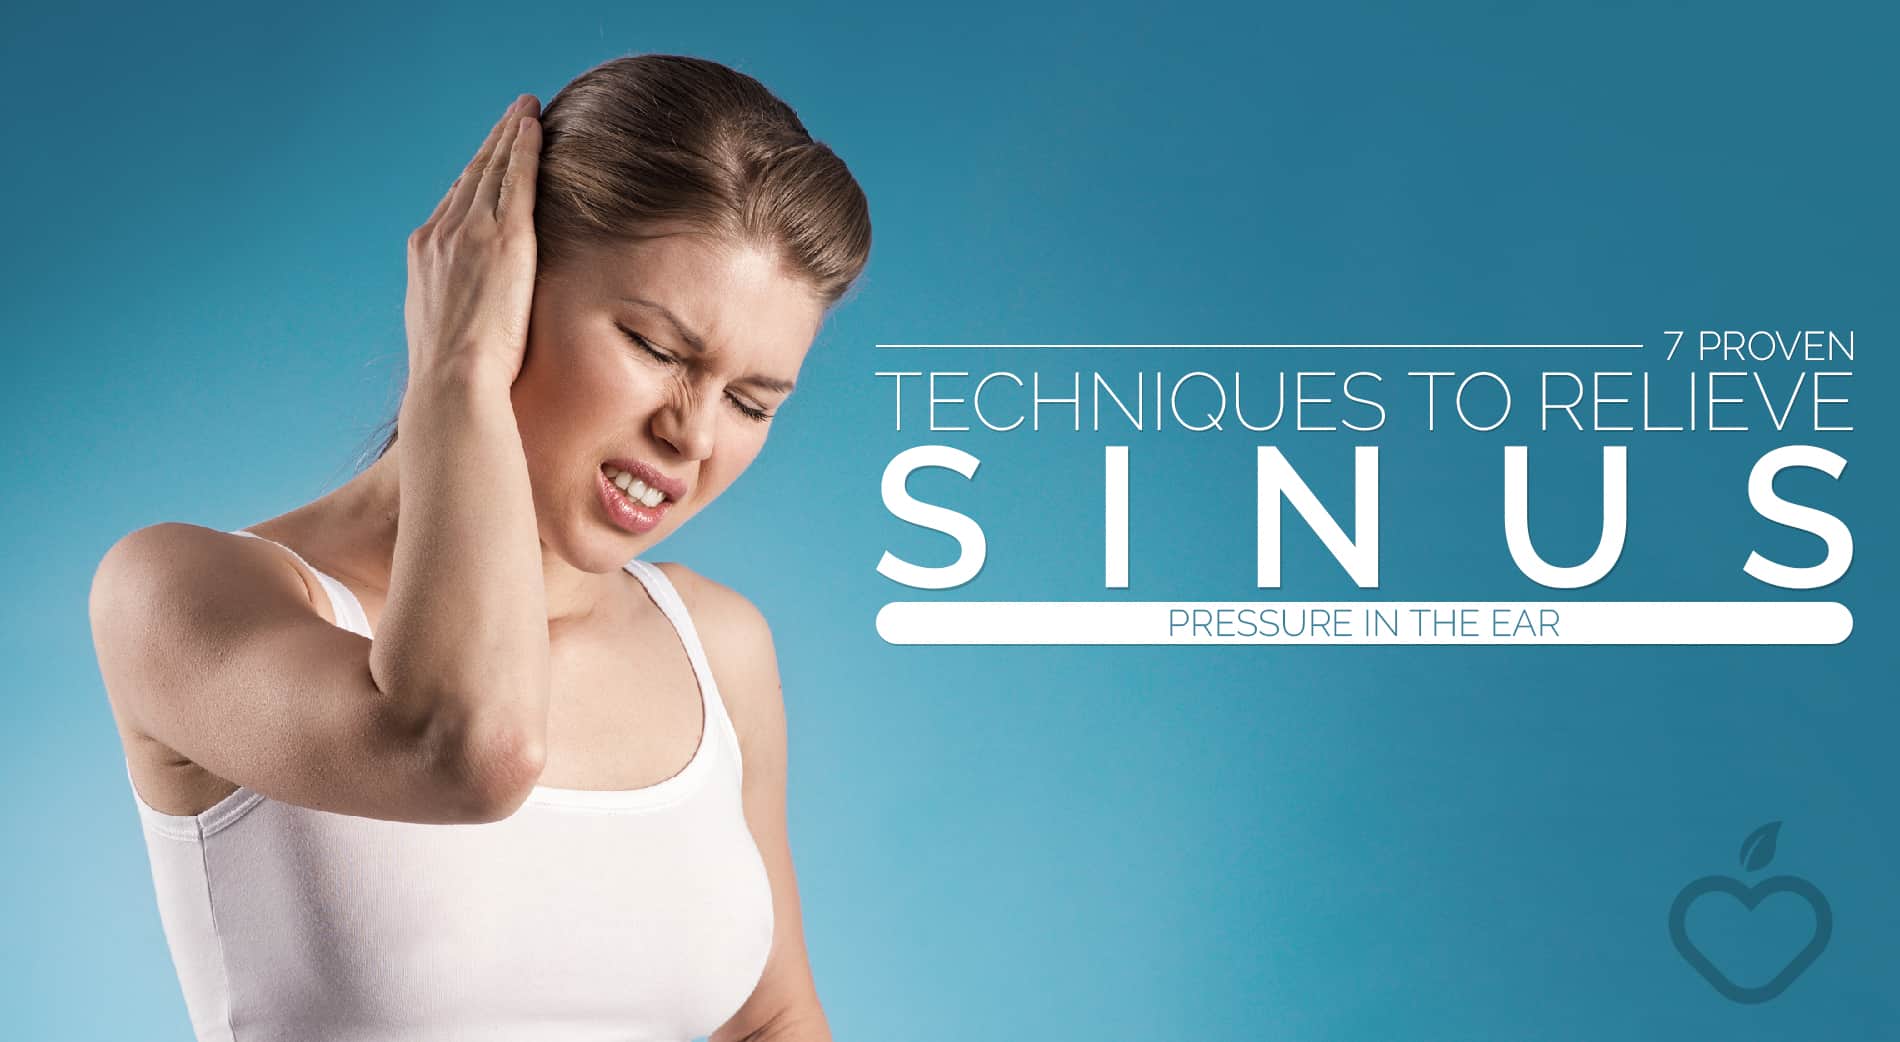 7 Proven Techniques To Relieve Sinus Pressure In The Ear